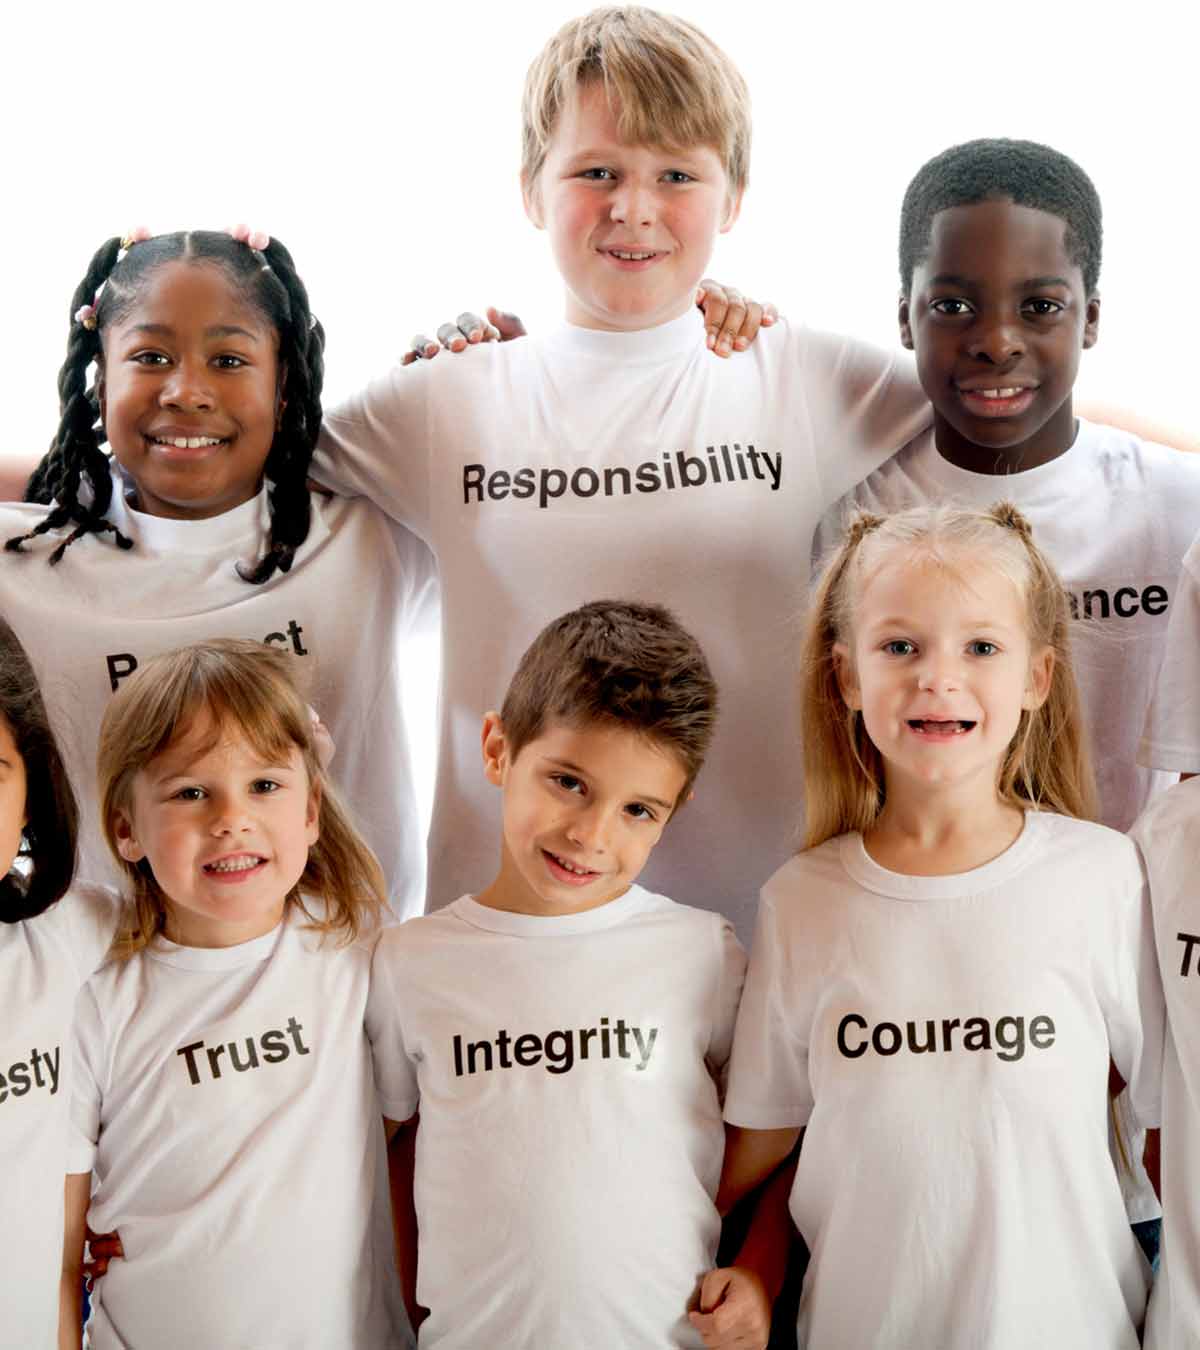 15 Moral Values For Students To Help Build A Good Character